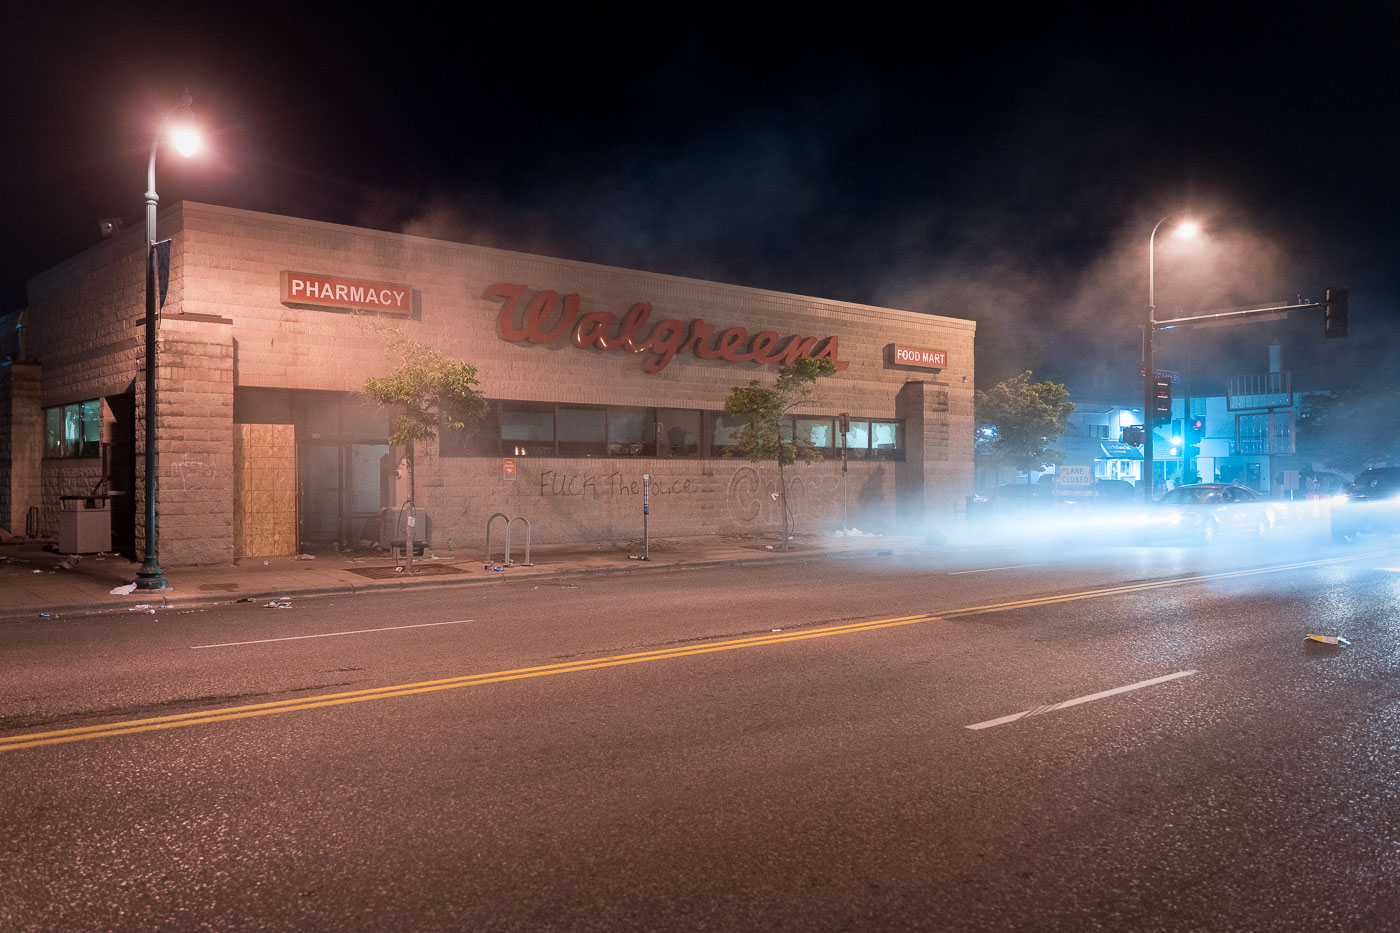 Walgreens store on fire